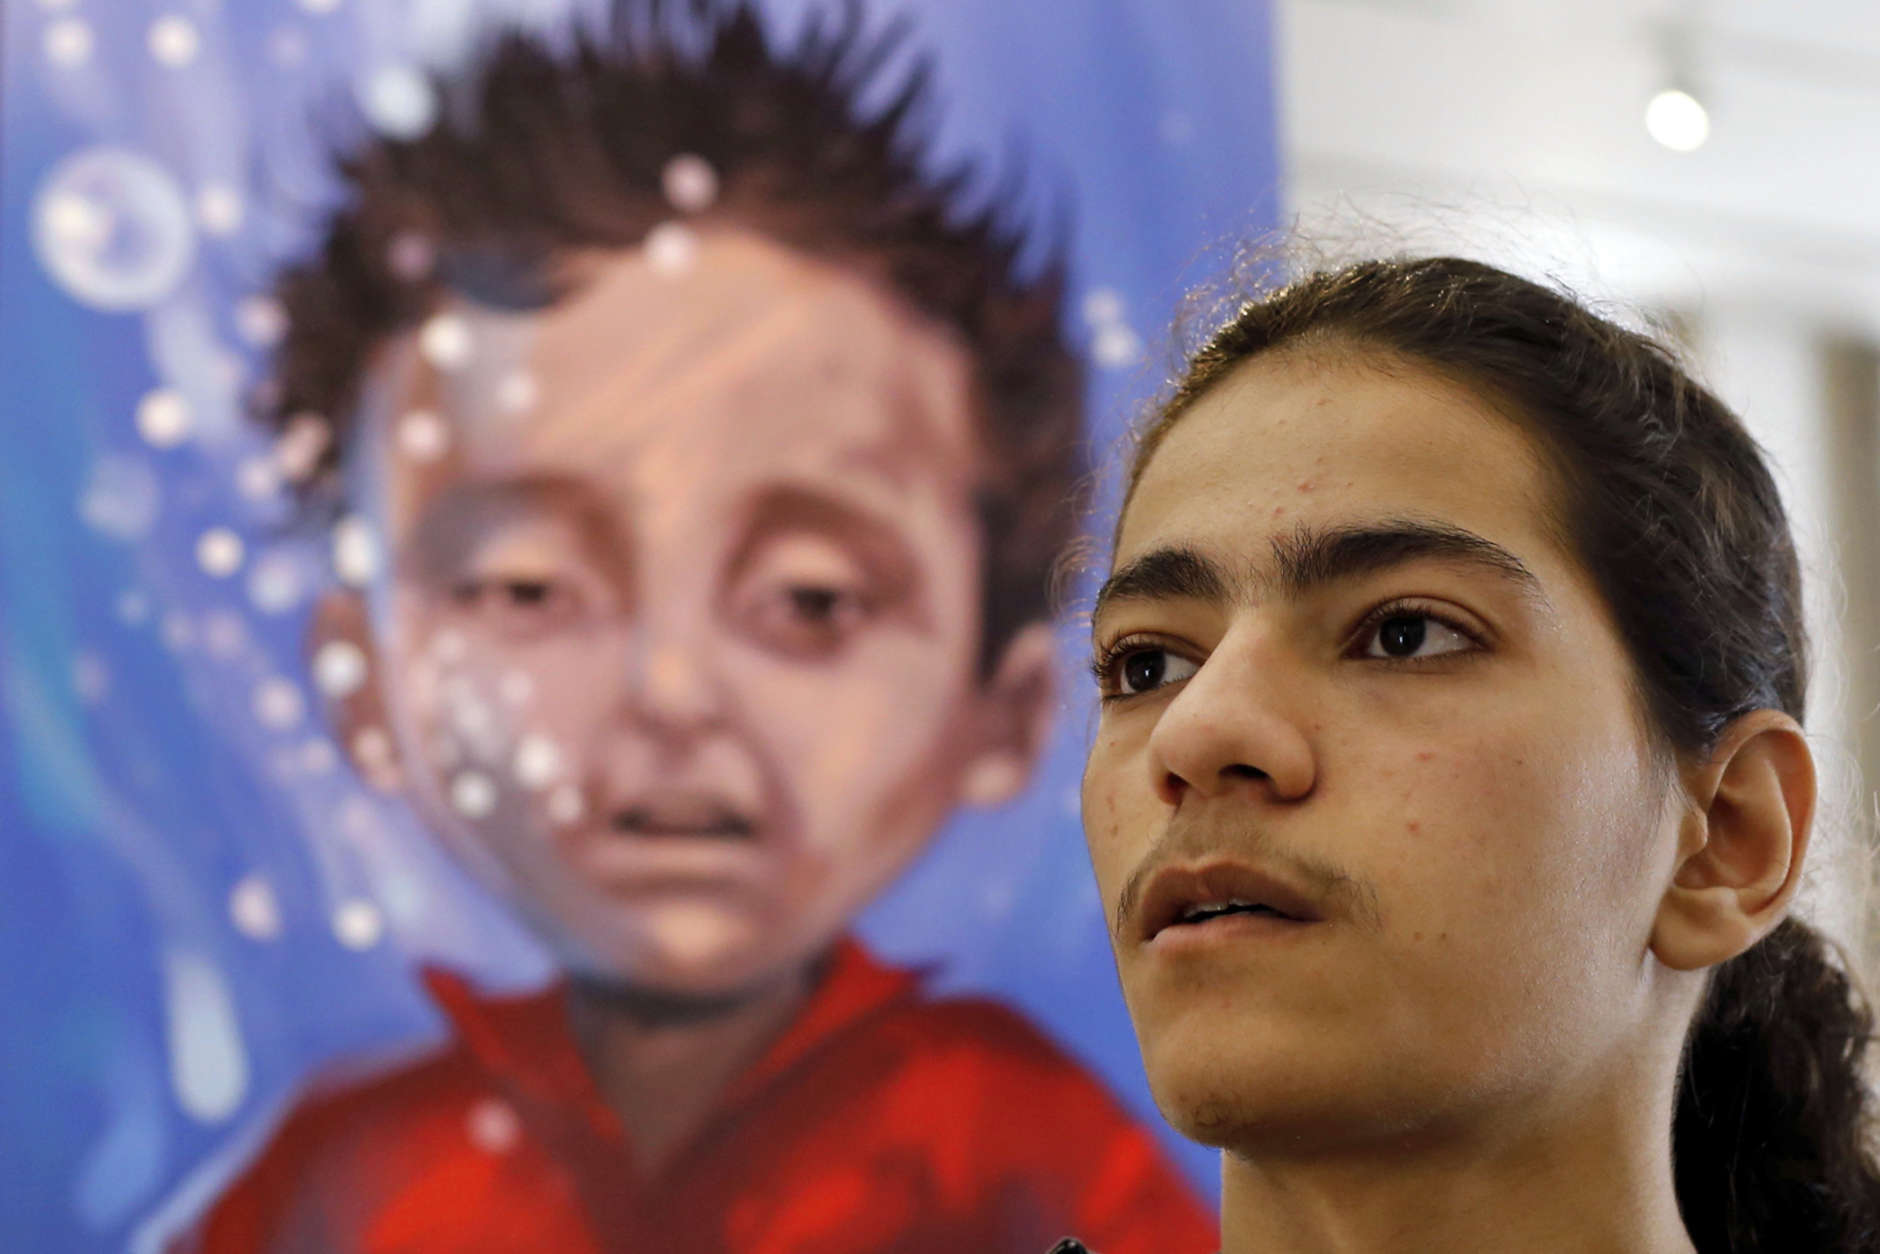 In this Monday, March 12, 2018 photo, Bassel Mokdad, 17, who is paralyzed from a spinal injury incurred during the war in Syria, speaks to The Associated Press, next to a painting of 3-year-old Syrian Aylan Kurdi, who was found dead on a Turkish beach, at the Beit Beirut museum, Beirut, Lebanon. After seven years of war in Syria, the United Nations has one thing to say: Stop the war on children. Of Syria’s estimated 10 million children, 8.6 million are now in dire need of assistance, nearly 6 million children are displaced or living as refugees and about 2.5 million are out of school. (AP Photo/Bilal Hussein)